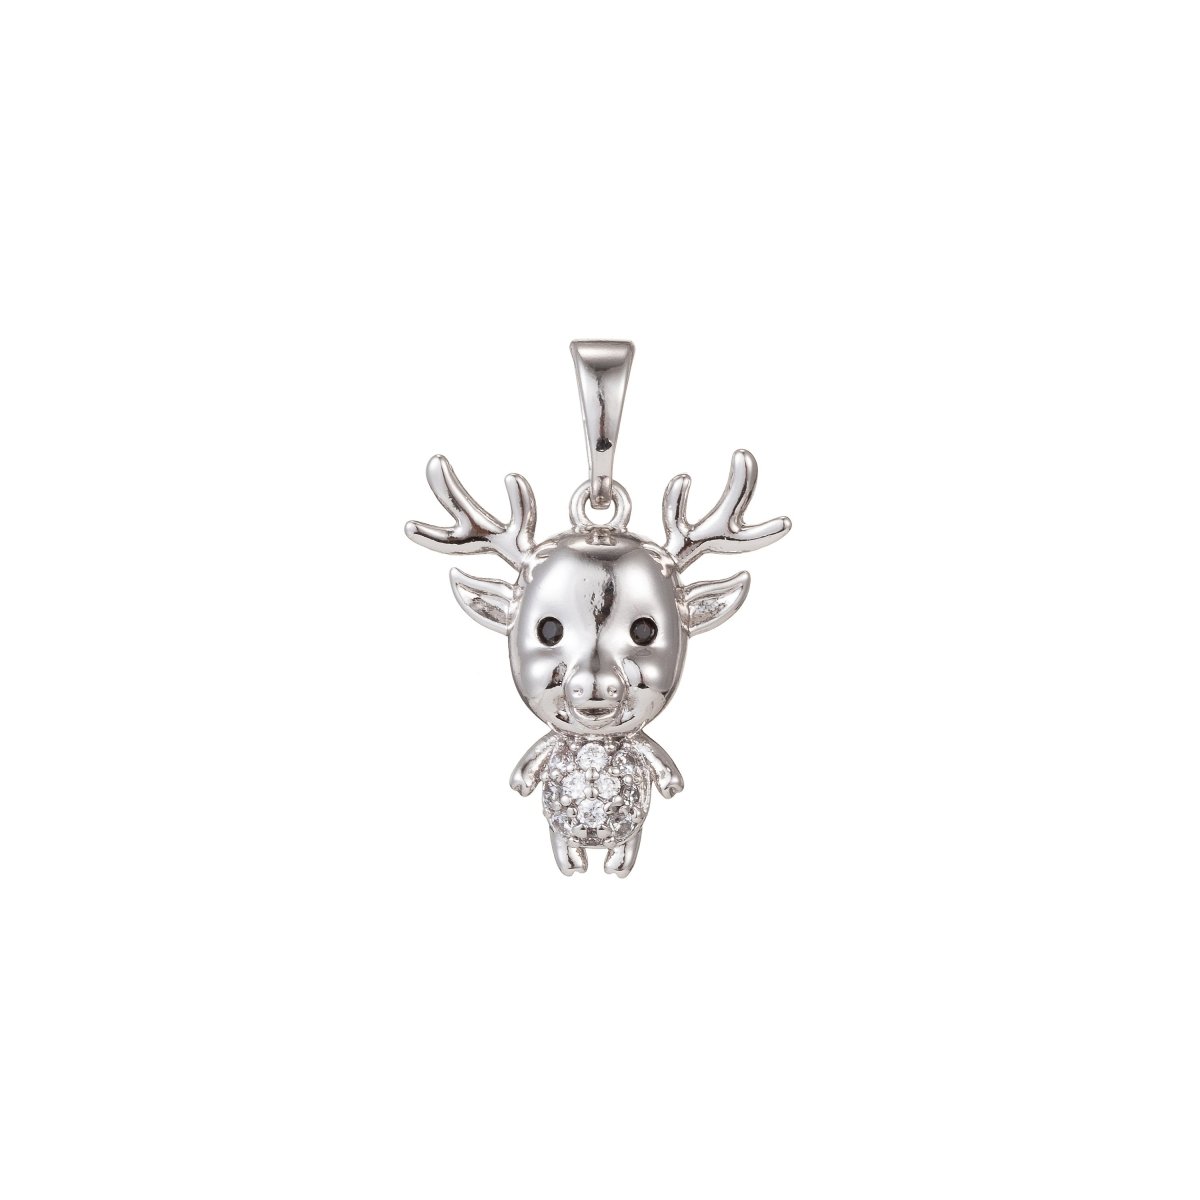 White Gold Filled Micro Pave CZ ReinDeer Pendant Charm, Deer Pendant Charm, White Gold Animal Pendant, For DIY Jewelry I-515 - DLUXCA